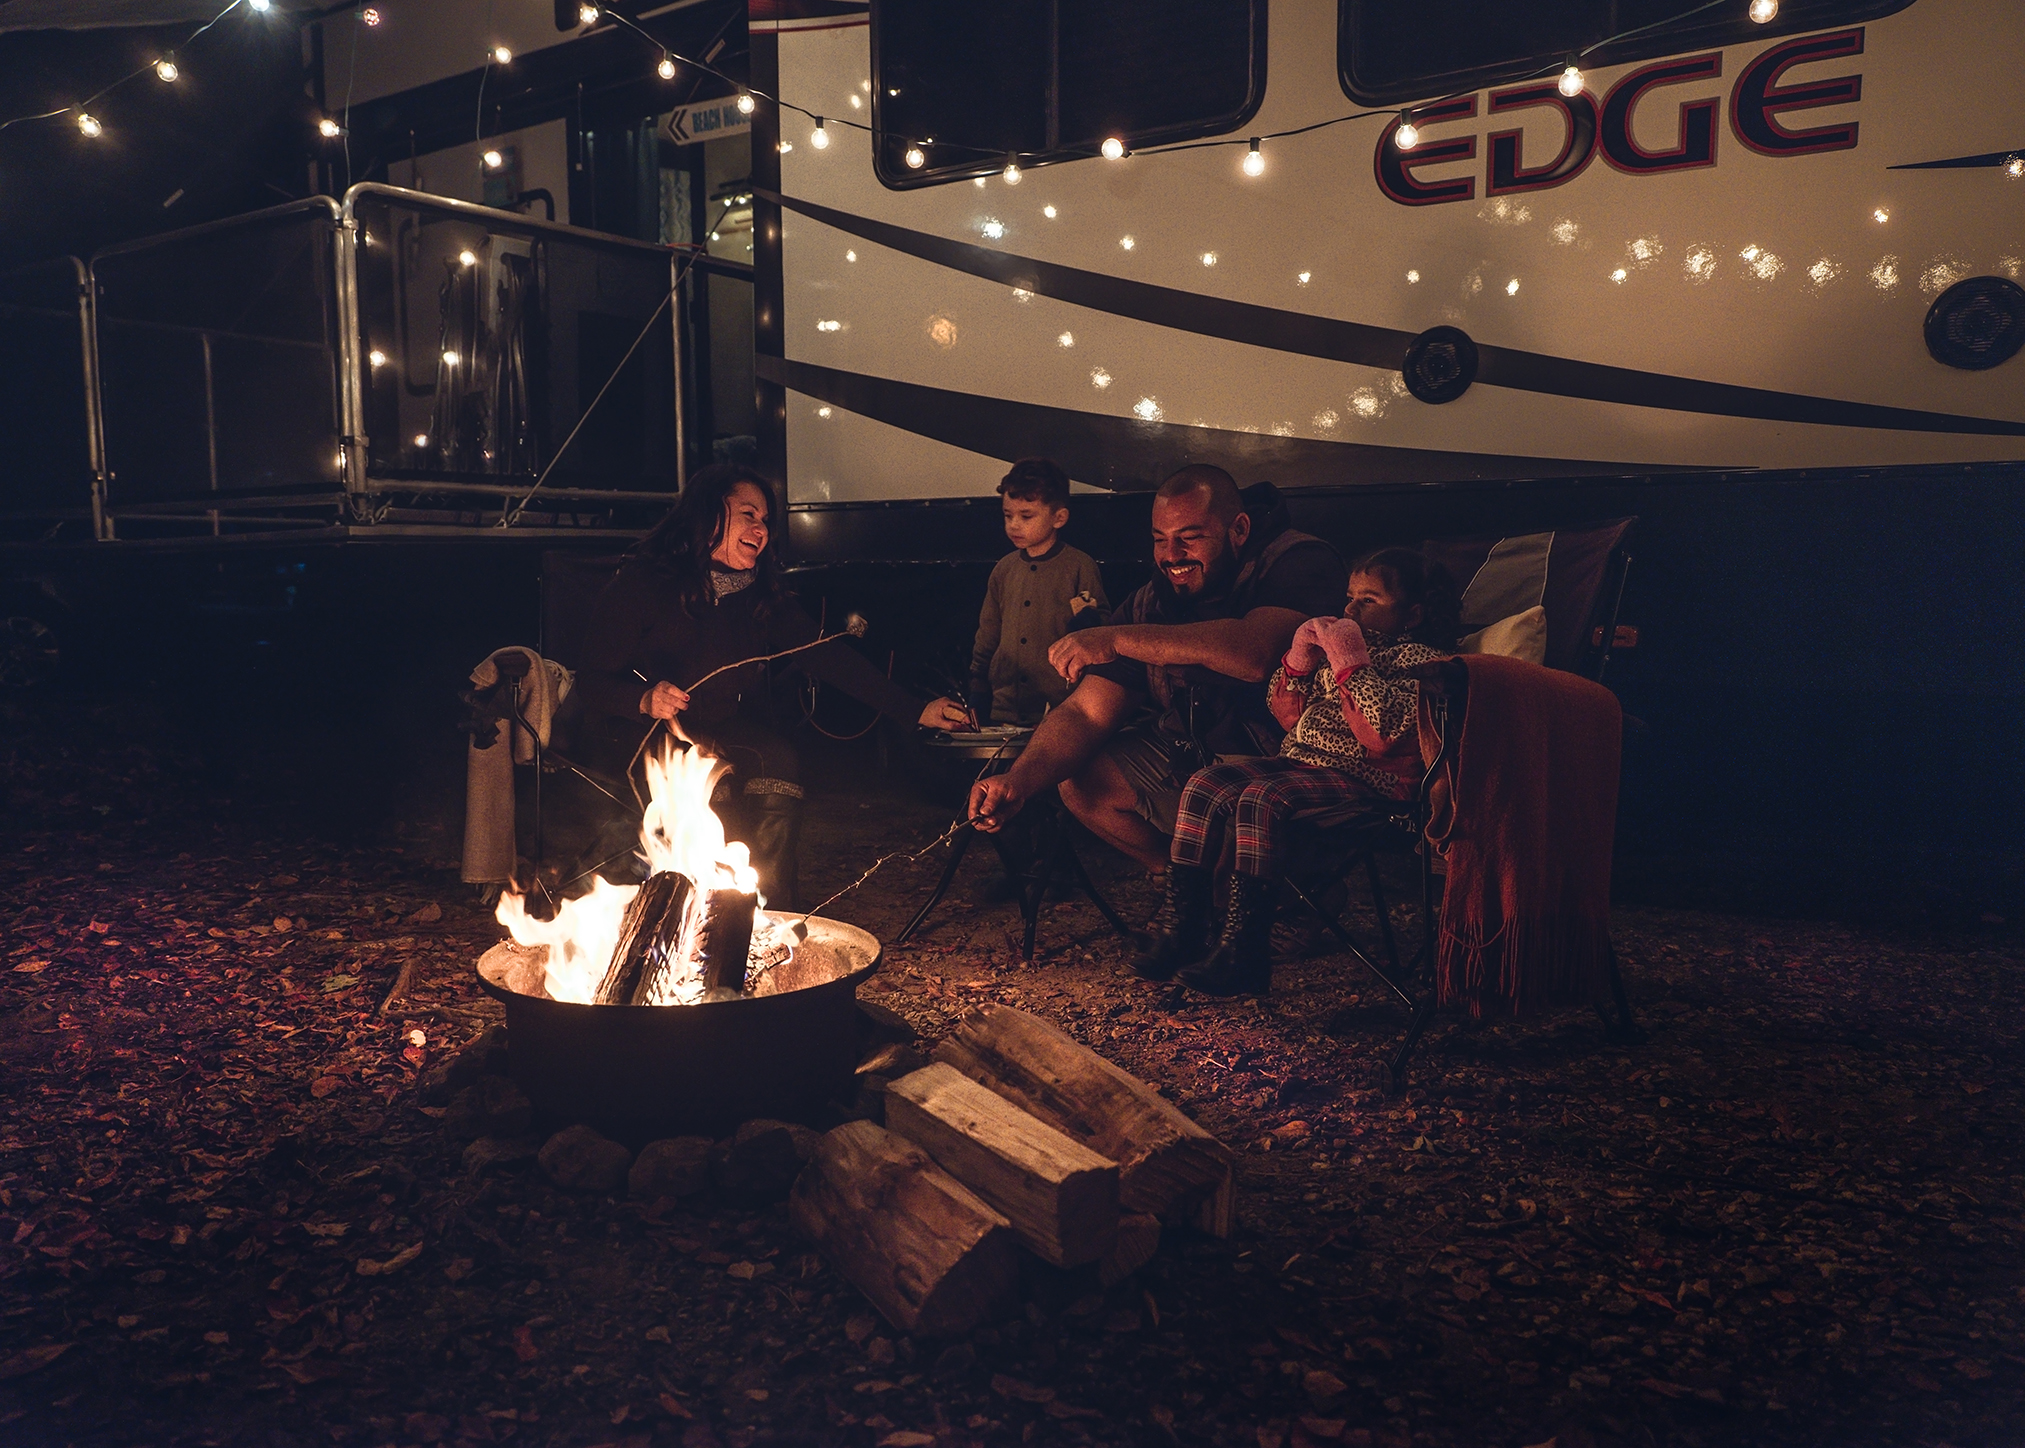 The Class family gathered around a campfire at night, with their toy hauler in the background.